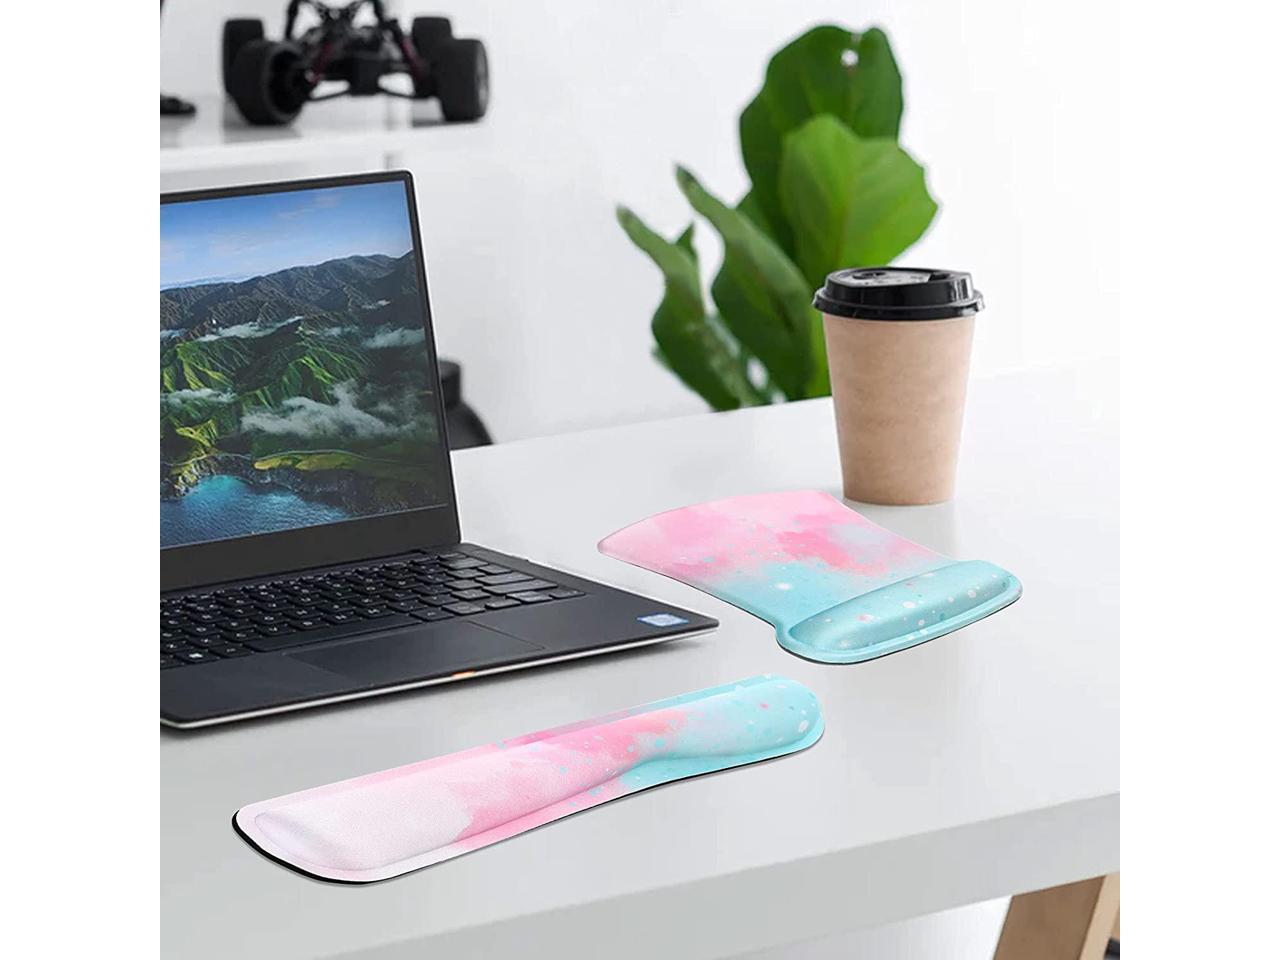 Ergonomic Memory Foam Keyboard Wrist Support Gel Mouse Mat Rubber Base Wrist Rest for Computer Working Gaming Easy Typing & Pain Relief Piszocr Keyboard Wrist Rest Mouse Pad Set and Coaster